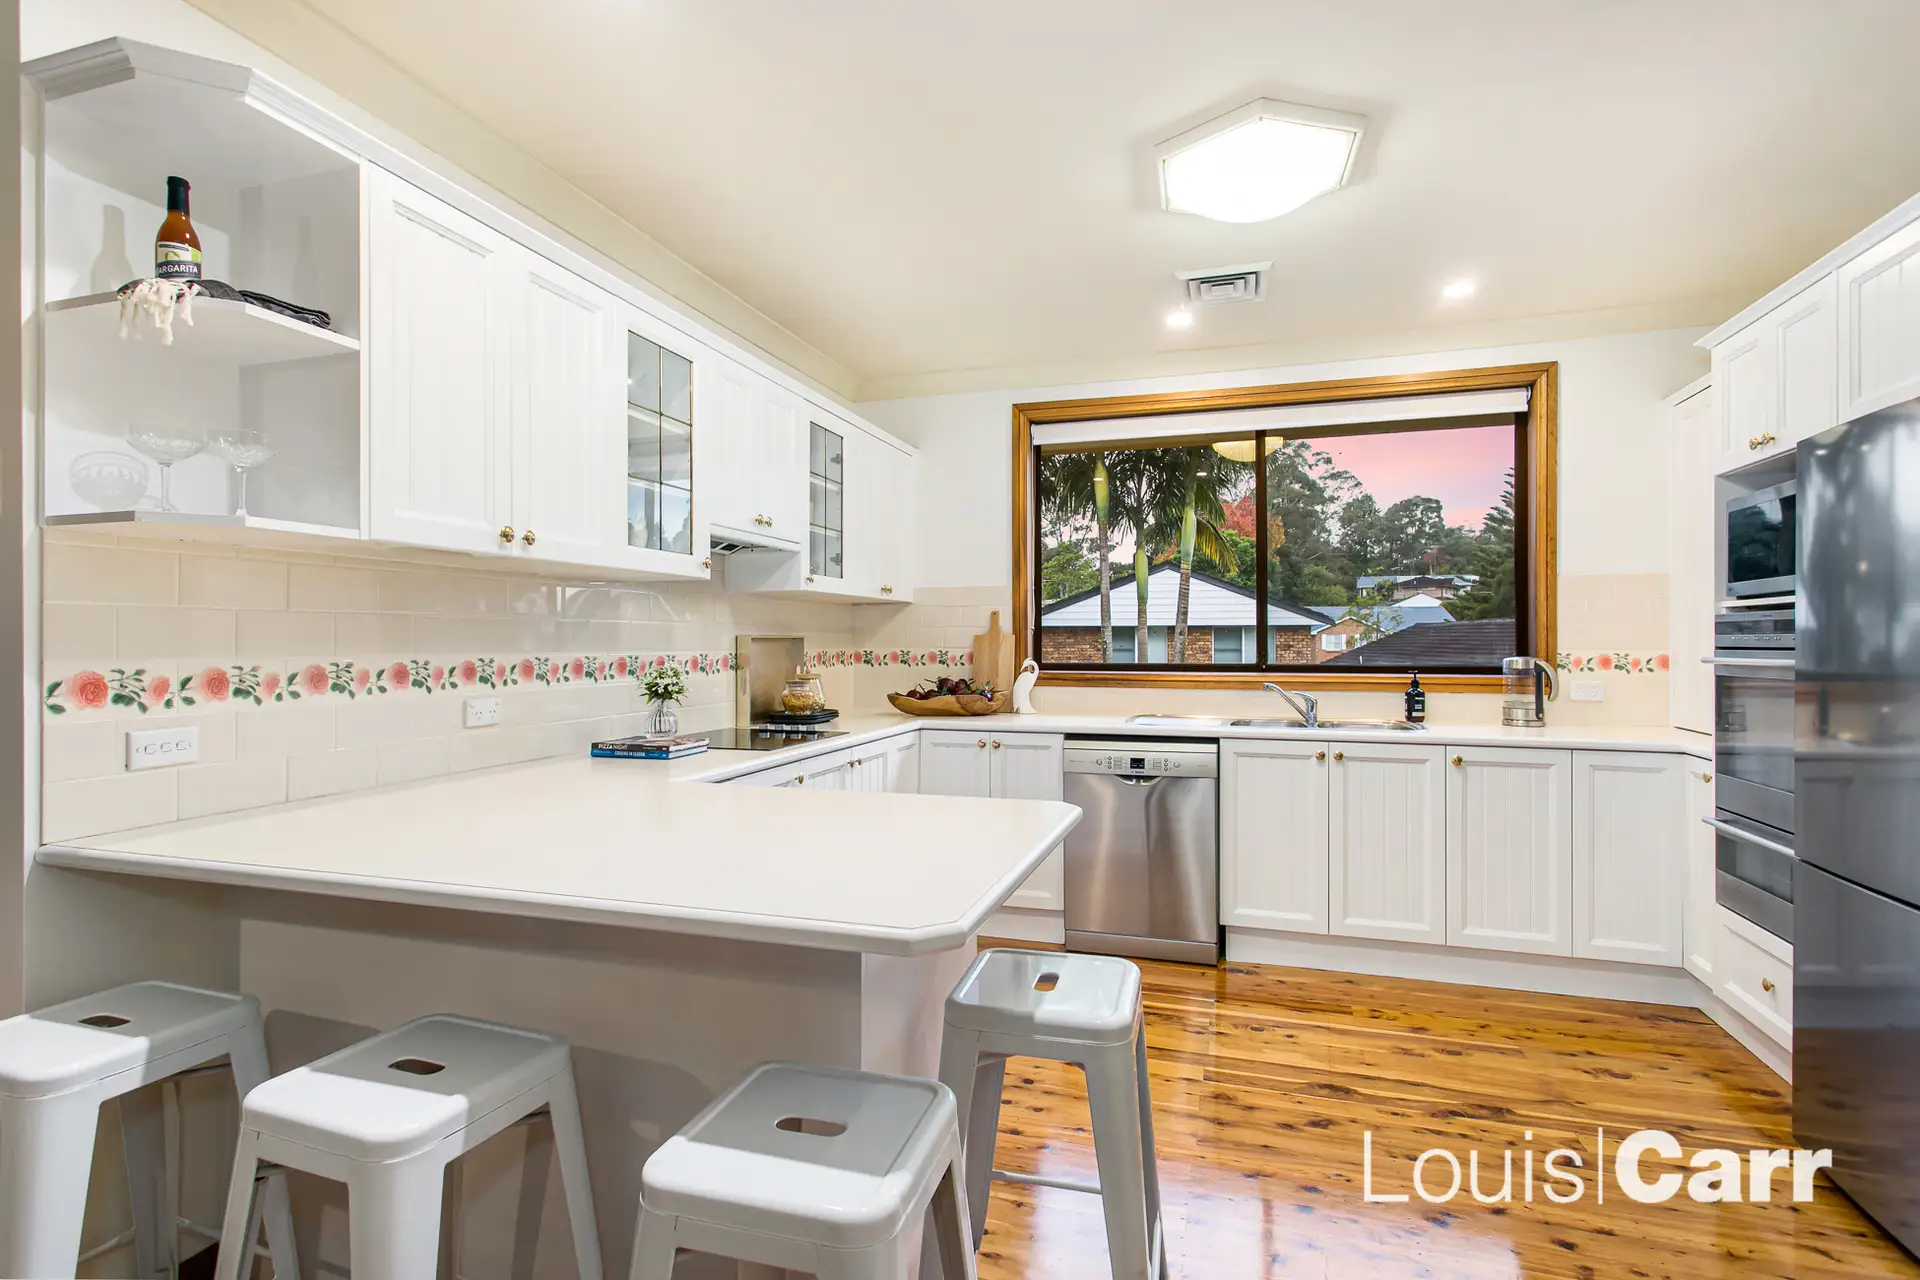 Photo #4: 7 Radley Place, Cherrybrook - Sold by Louis Carr Real Estate